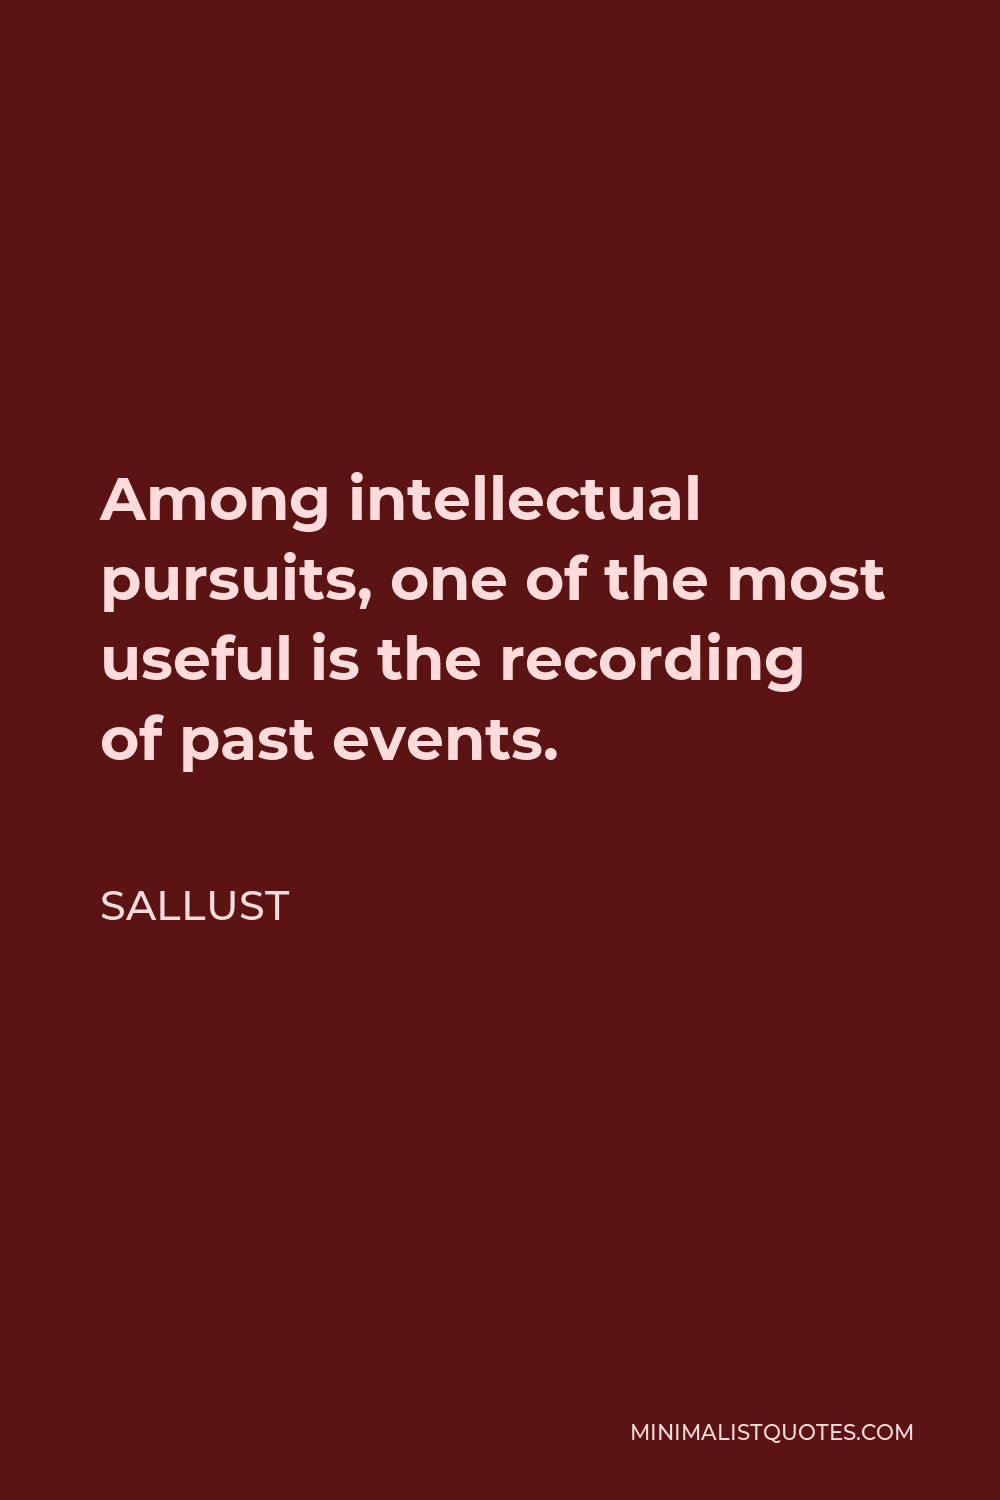 Sallust Quote - Among intellectual pursuits, one of the most useful is the recording of past events.